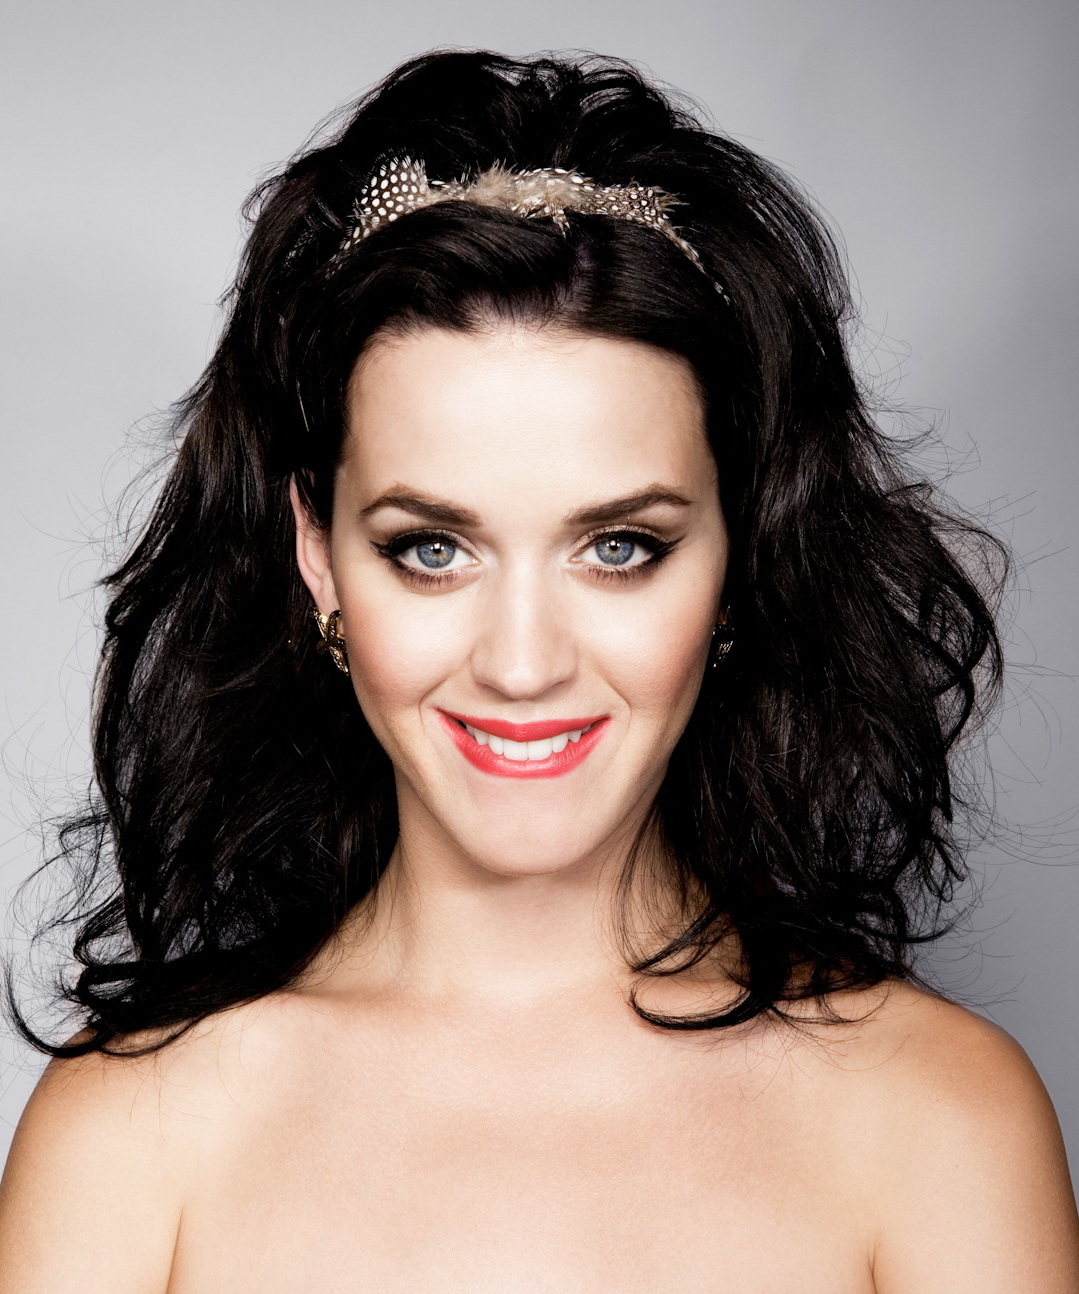 Picture of Katy Perry in General Pictures - katy-perry-1399772742.jpg ...